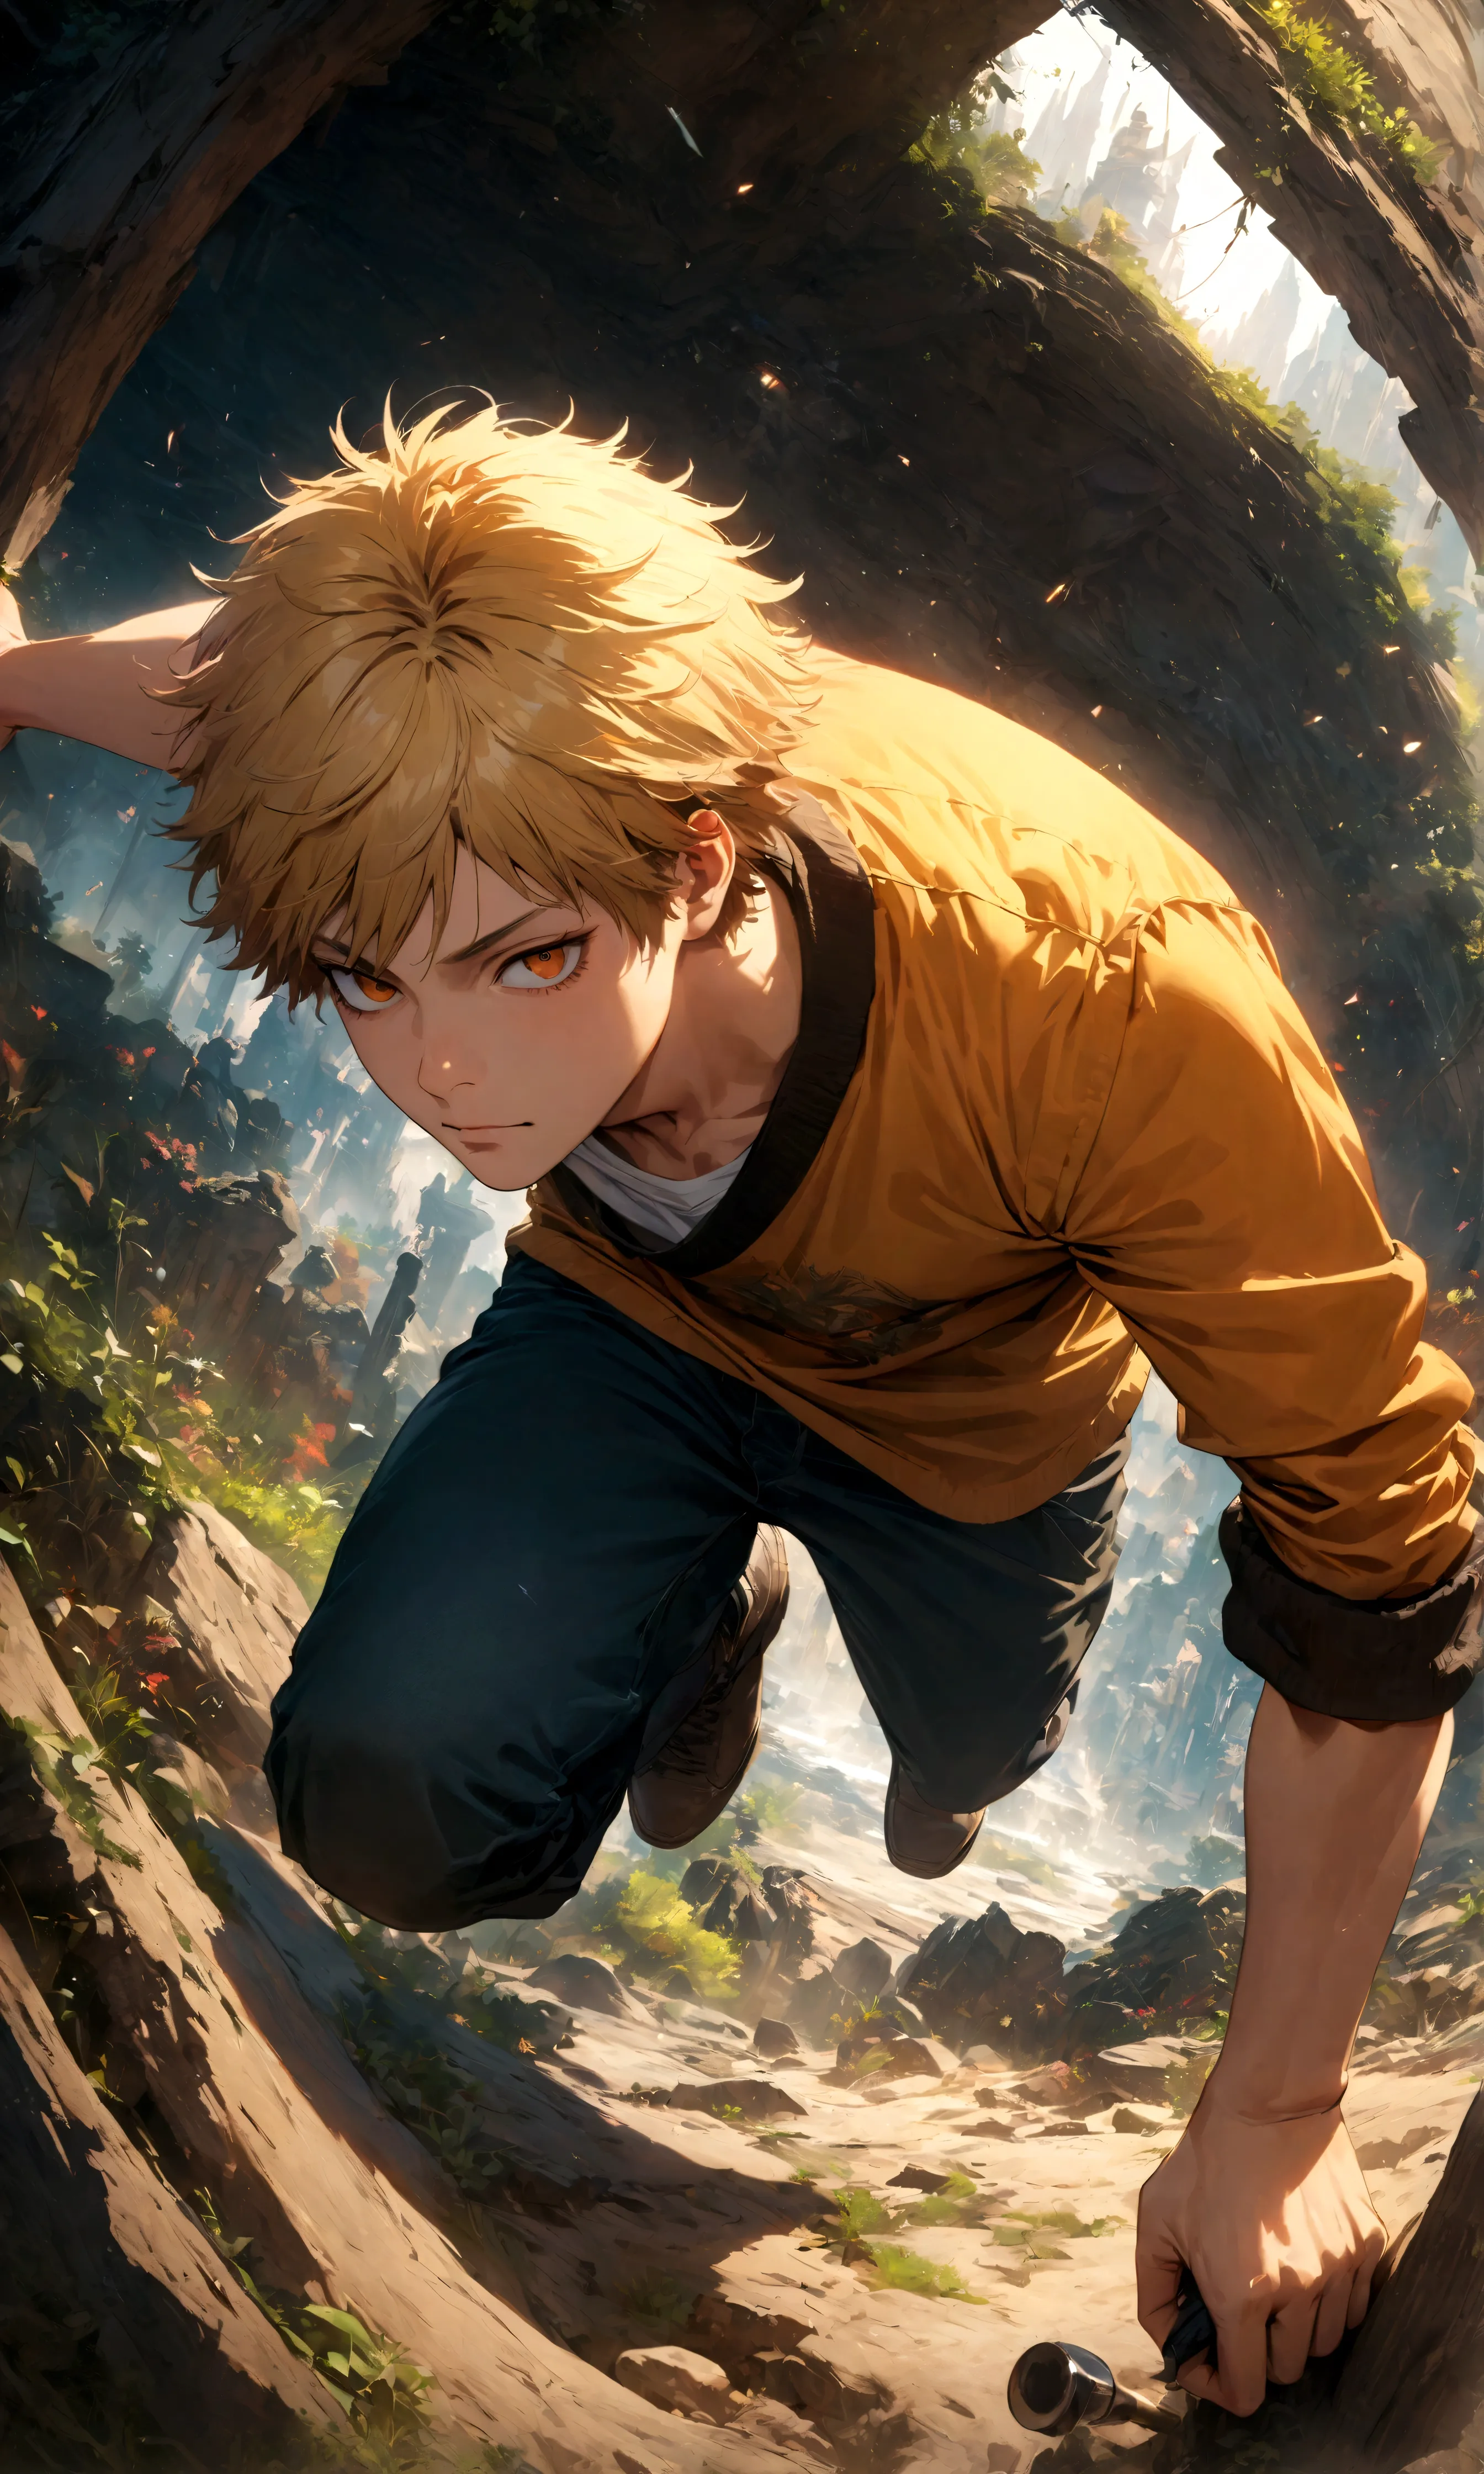 (1 male,Denji,Blonde,whiteＴshirt,Casual wear),Characters from Chainsaw Man,Intricate details,Dynamic Pose,Decadent,artwork,rende...